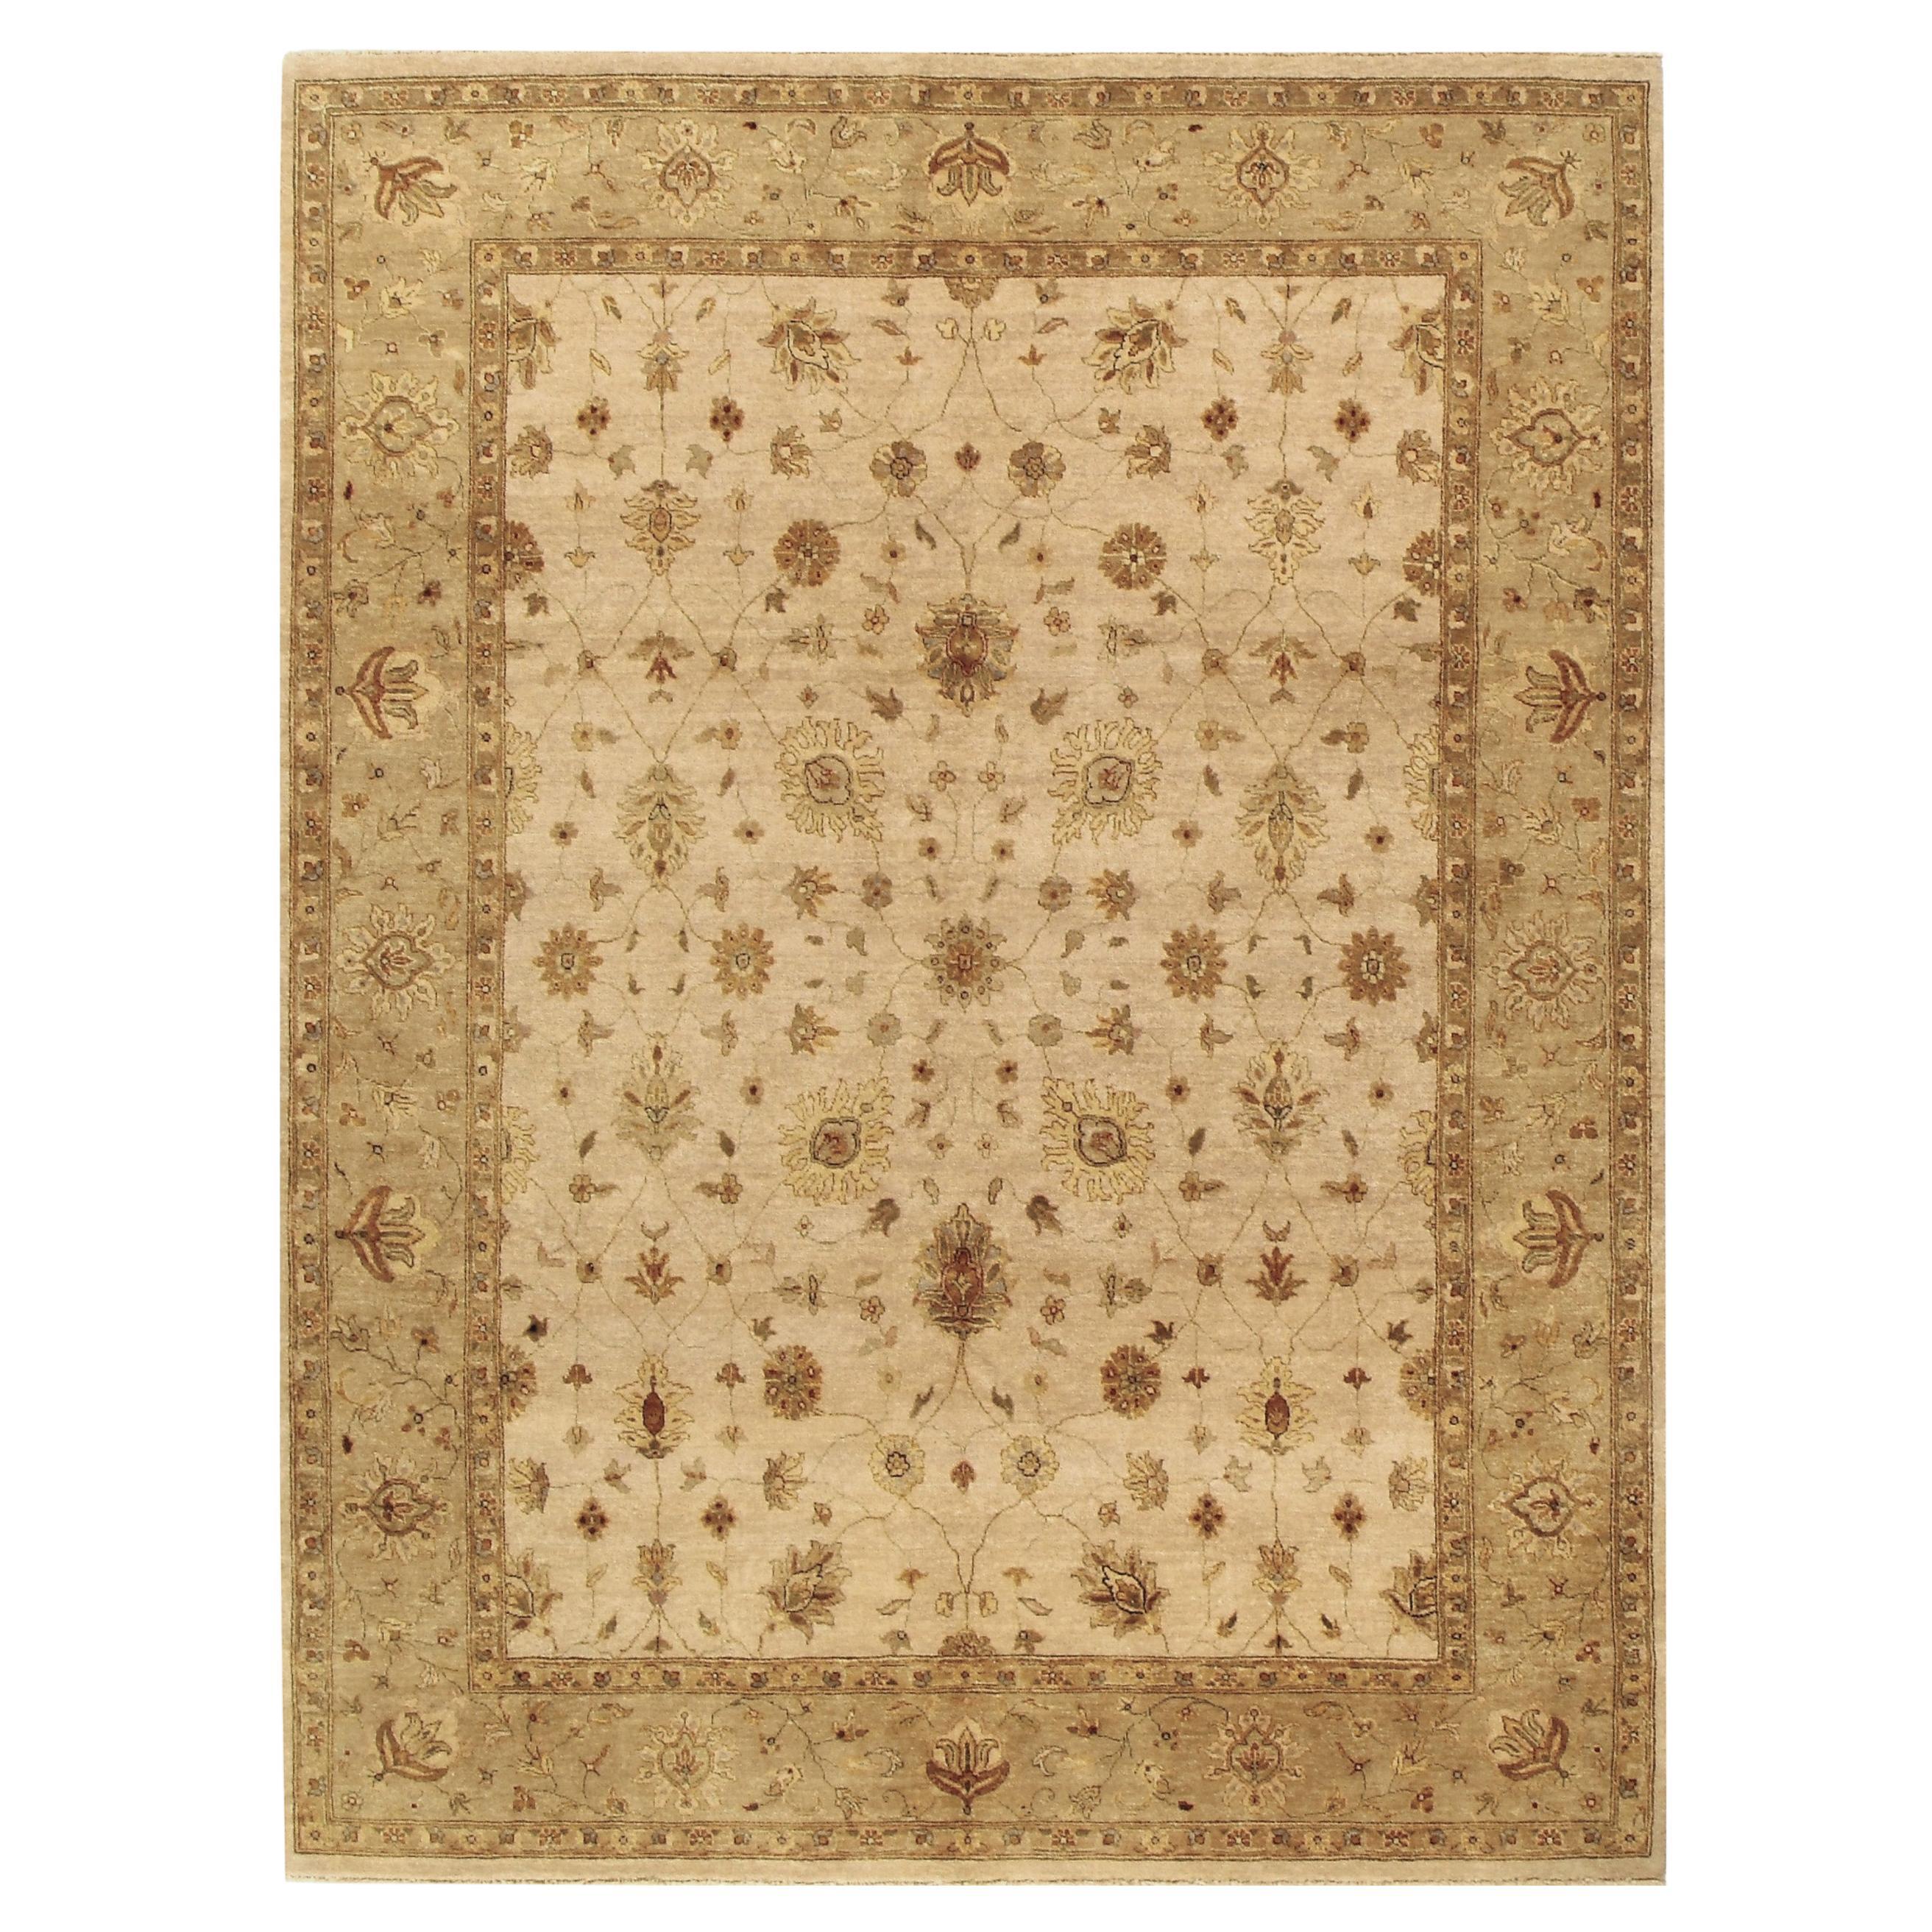 Luxury Traditional Hand-Knotted Amritsar Sultanabad Ivory/Beige 14x28 Rug